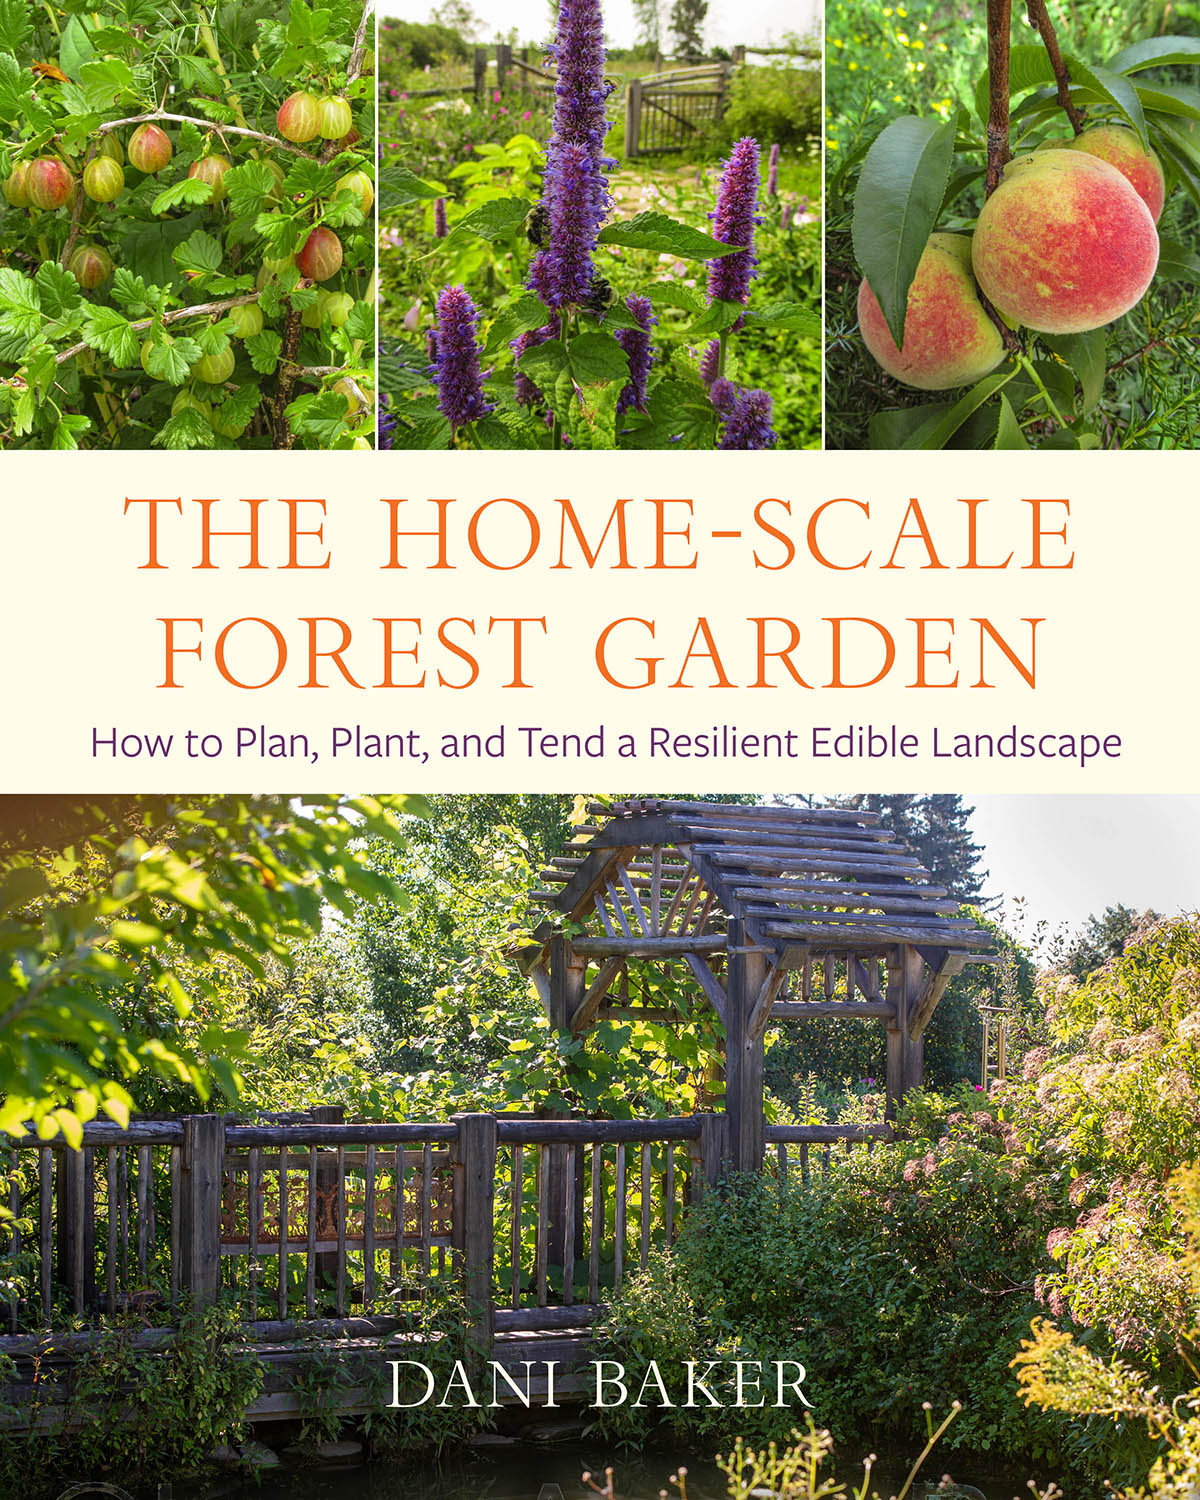 The Home-Scale Forest Garden by Dani Baker